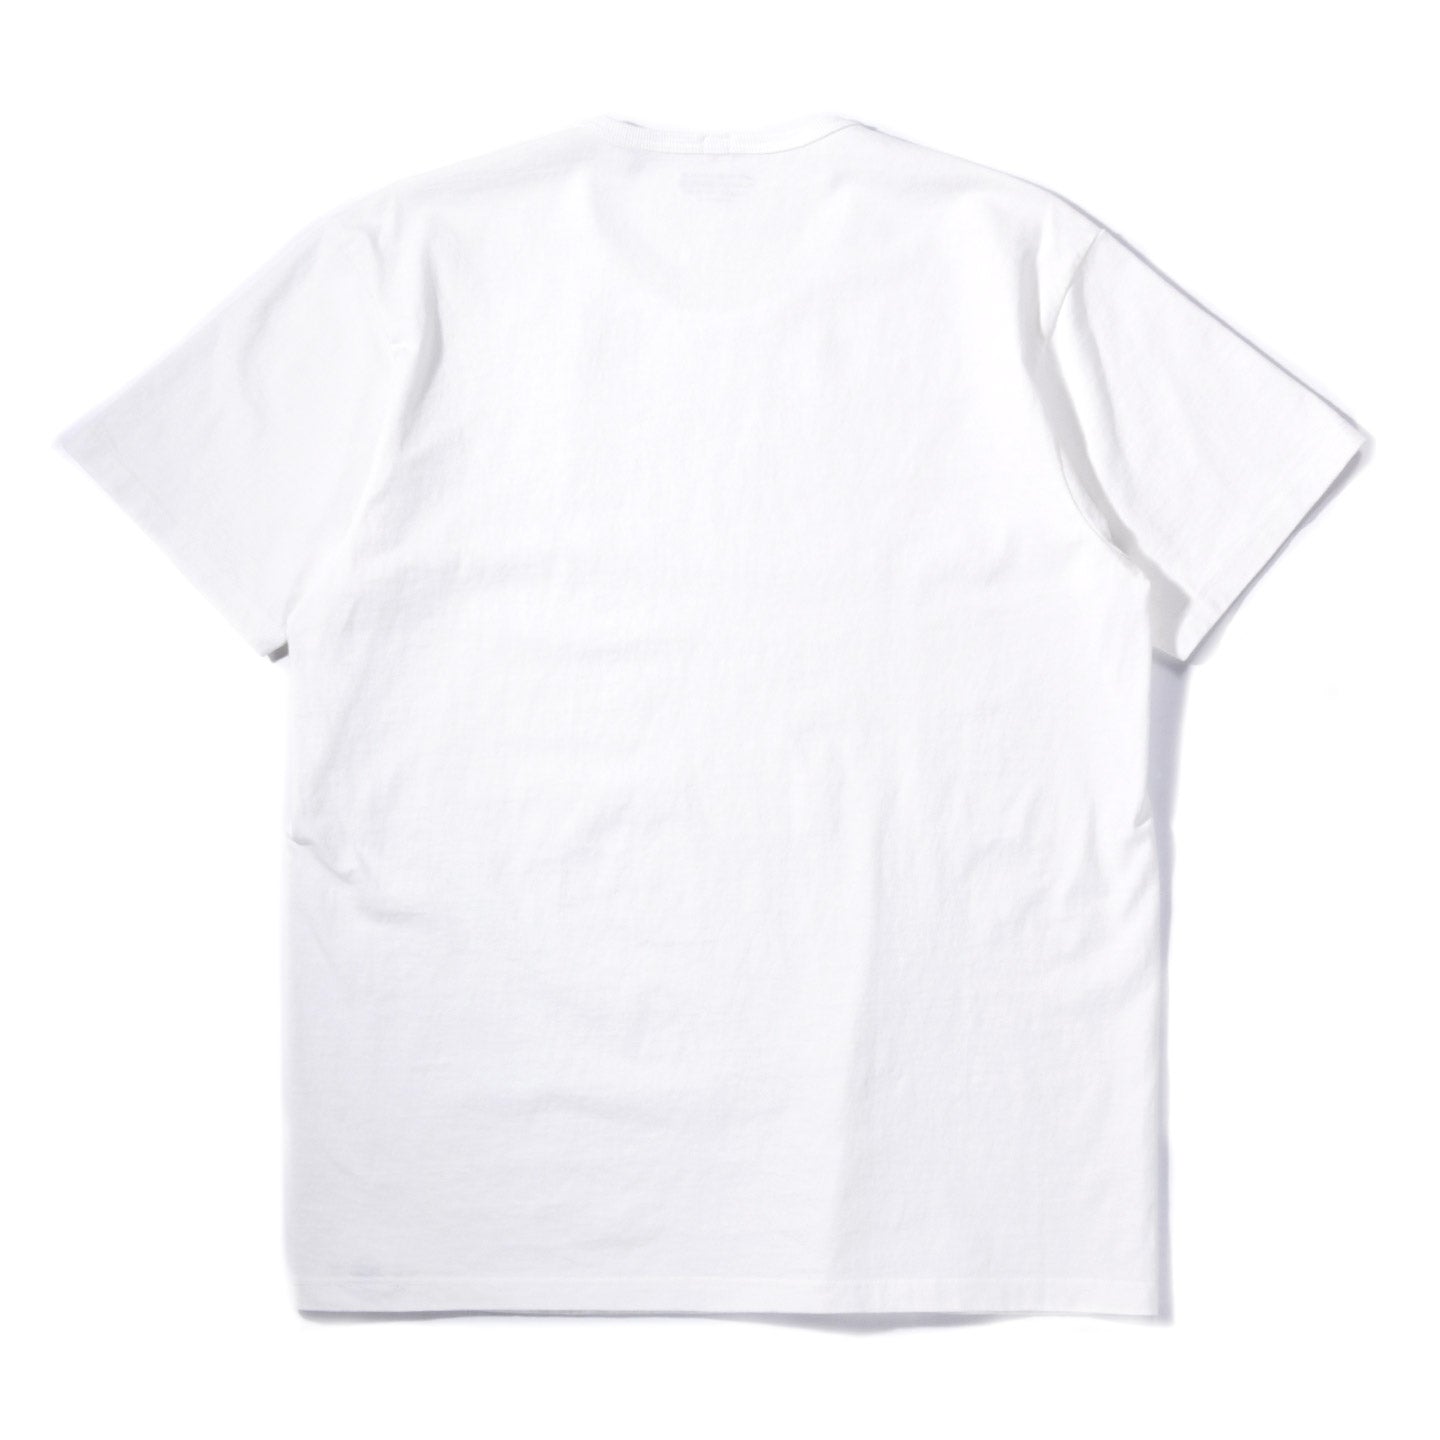 LADY WHITE CO. T-SHIRT 2-PACK WHITE